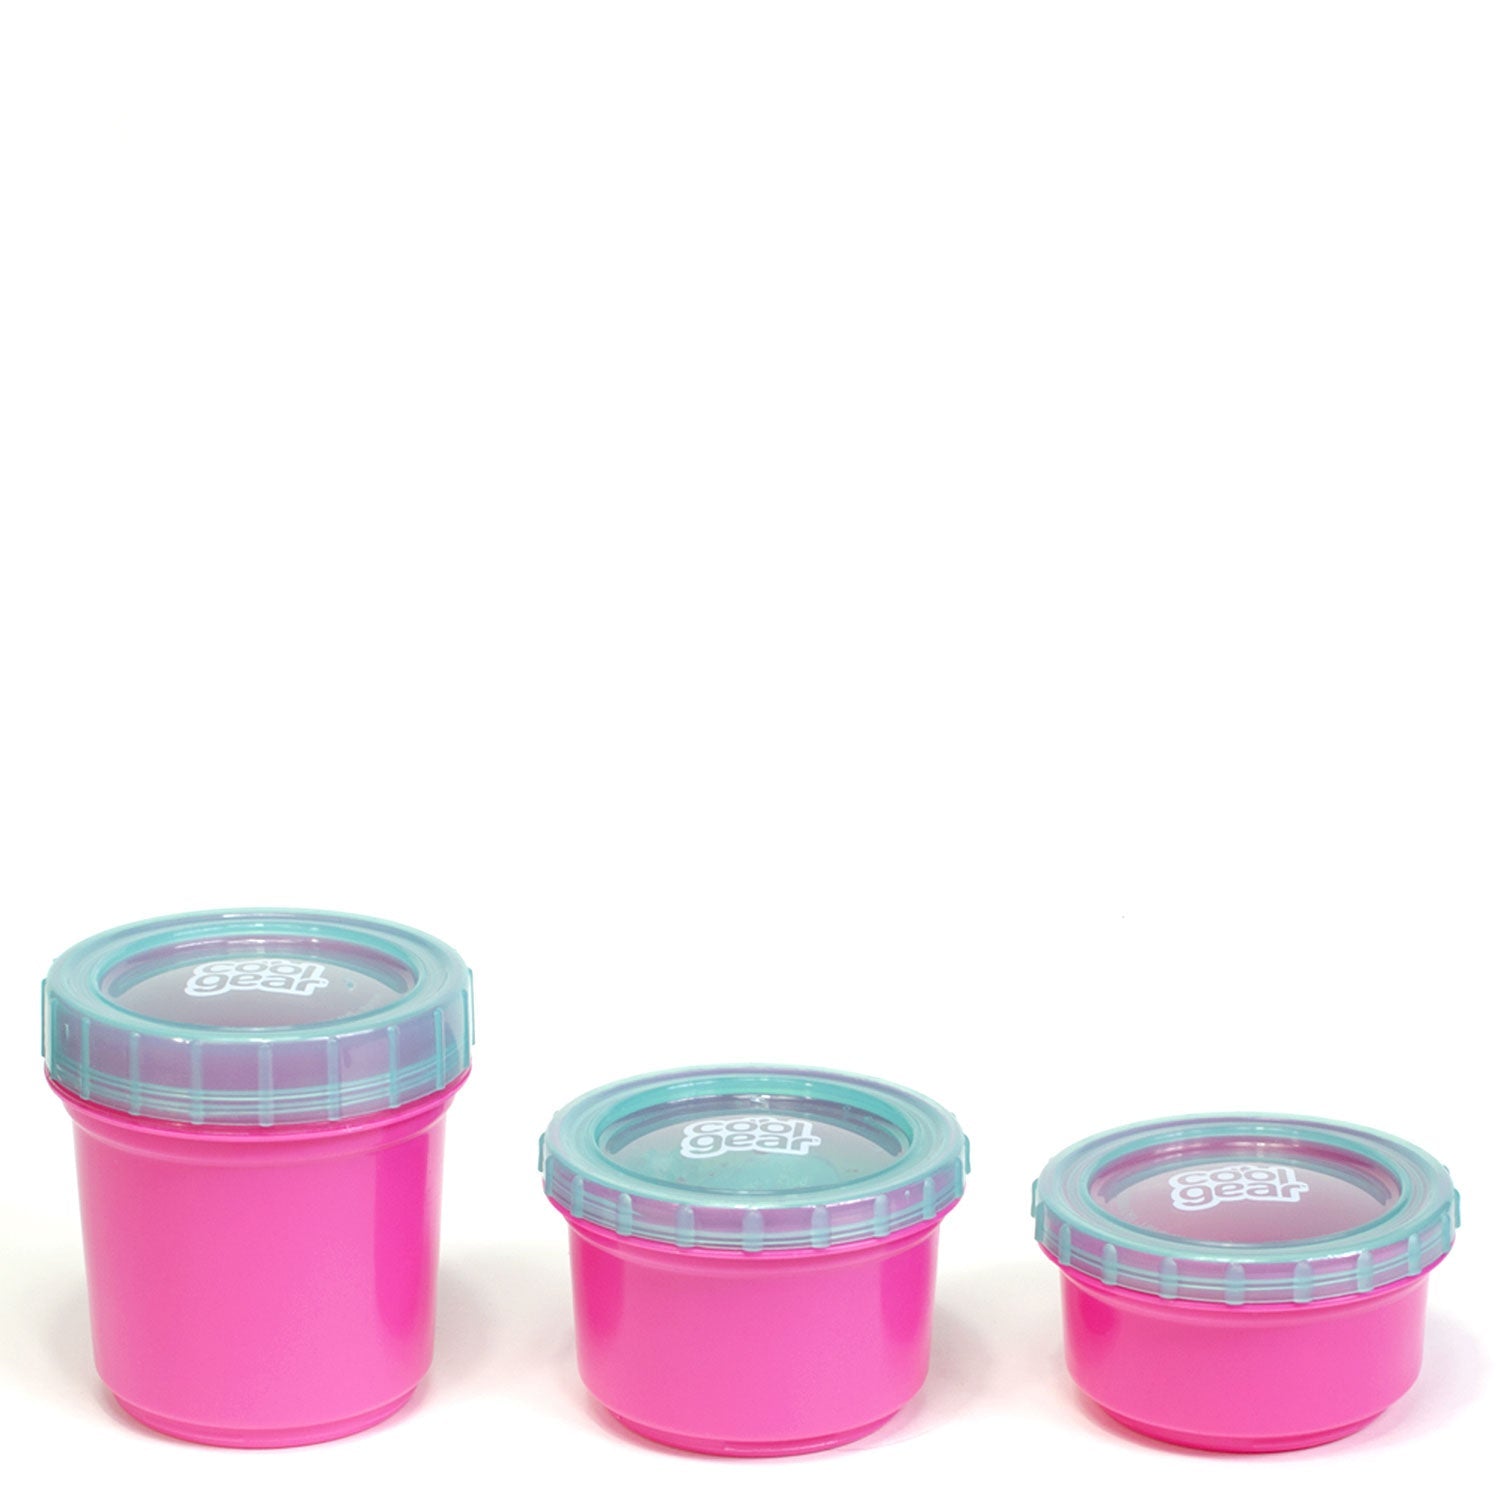 24 Pack Slime Containers with Lids - Reusable, Translucent, No